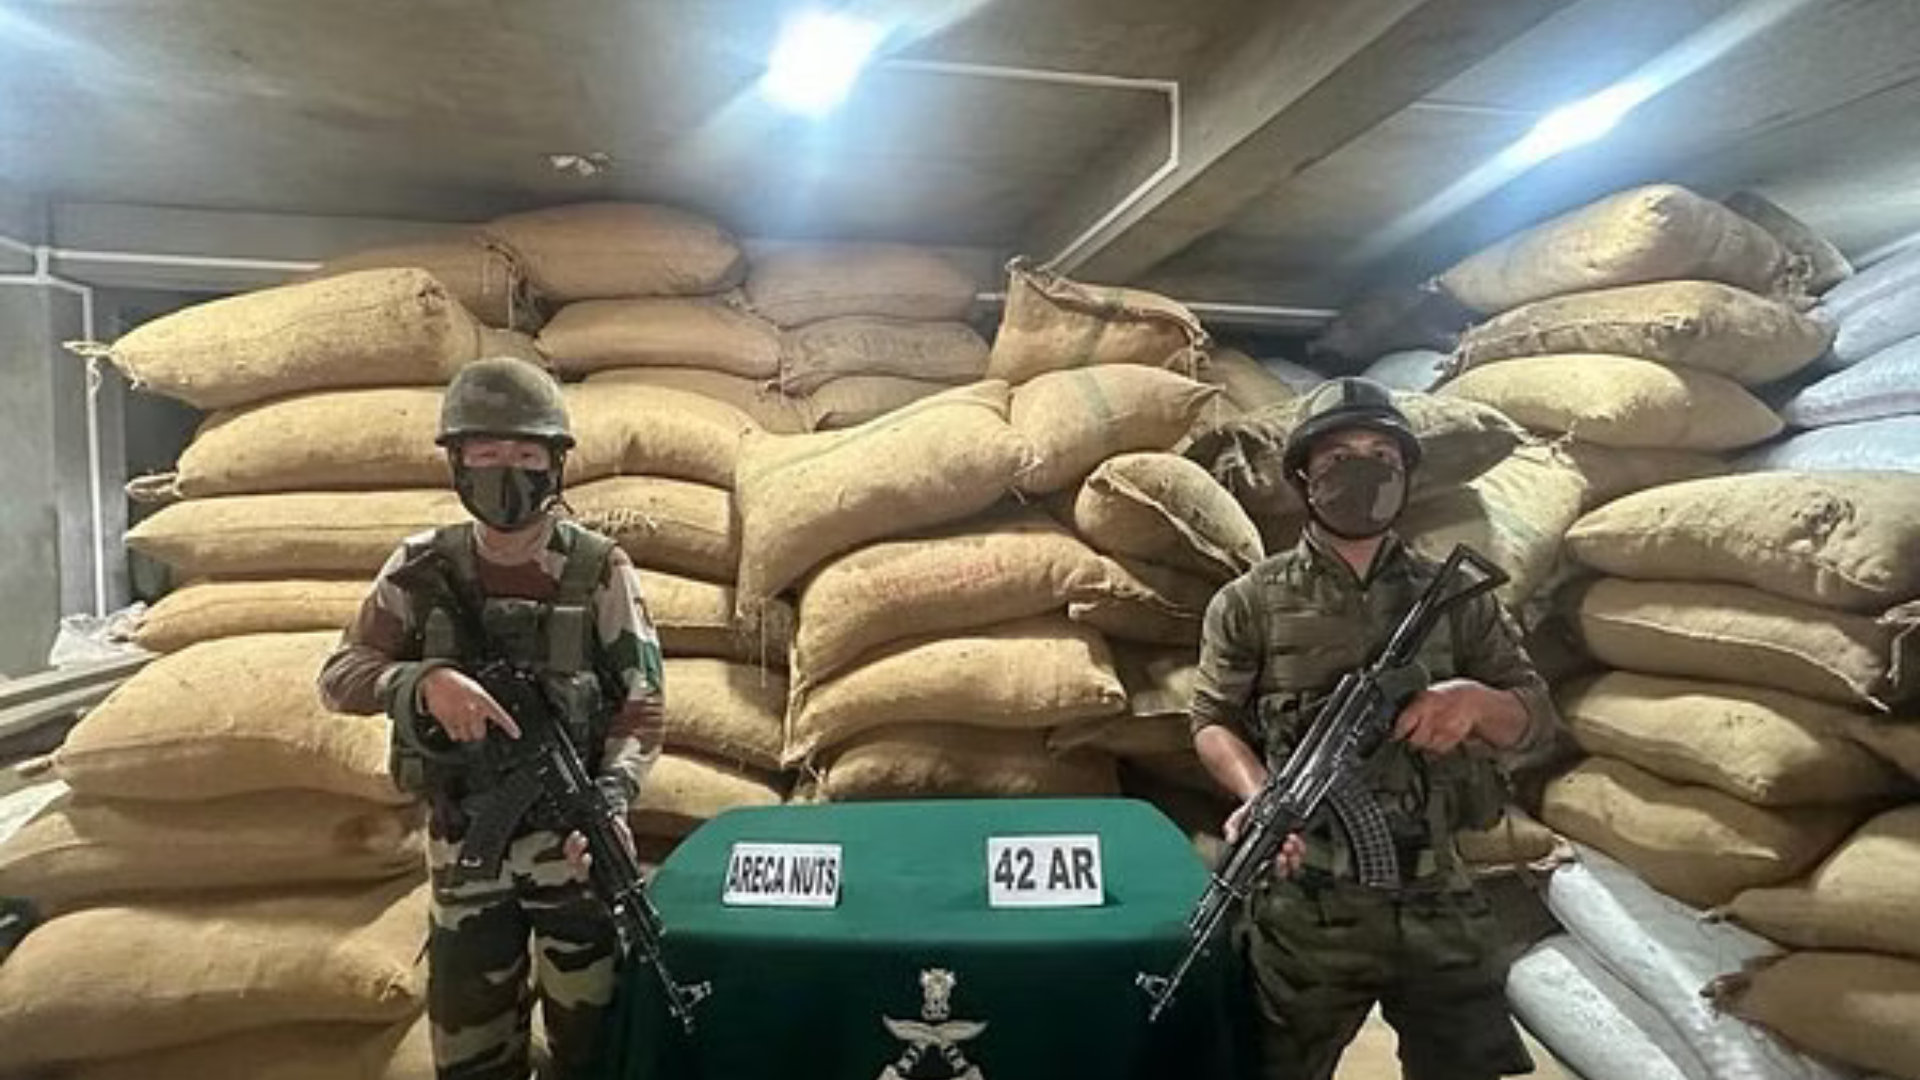 Assam Rifles Seized 100 bags of Areca Nuts, Worth Rs 56 Lakh in Mizoram